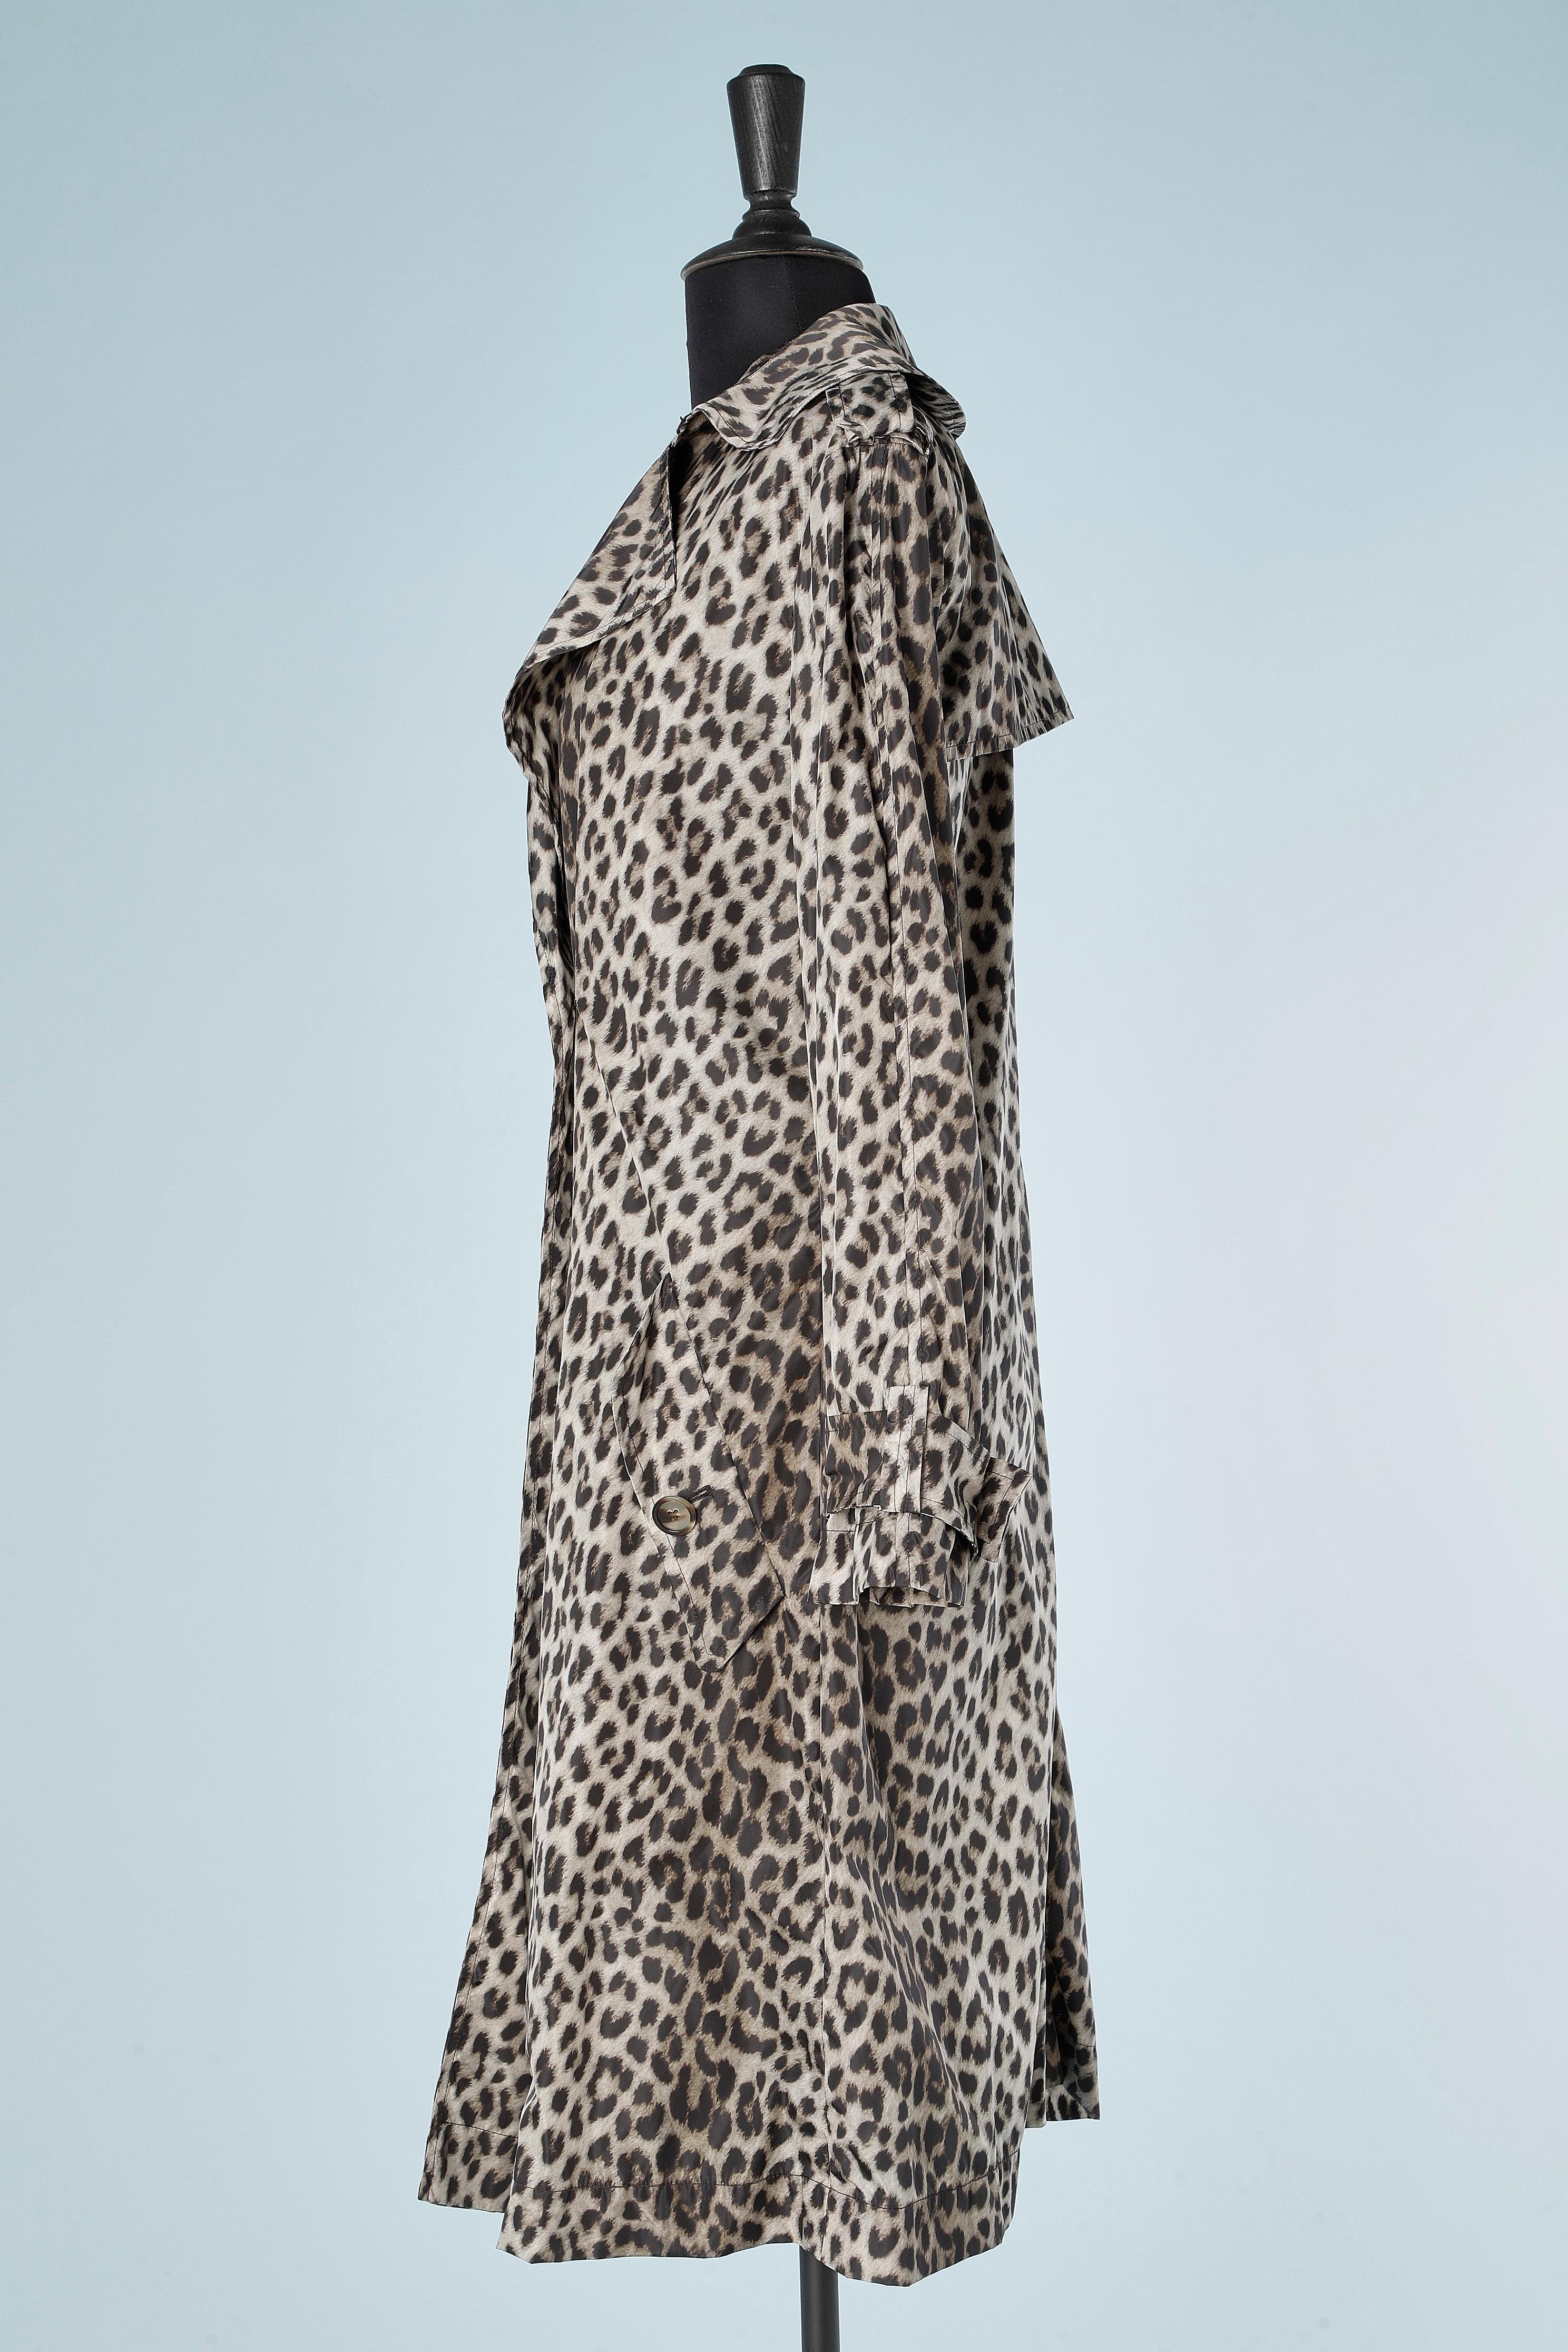 Nylon leopard printed double-breasted trench-coat Lanvin by Alber Elbaz 2010 For Sale 1